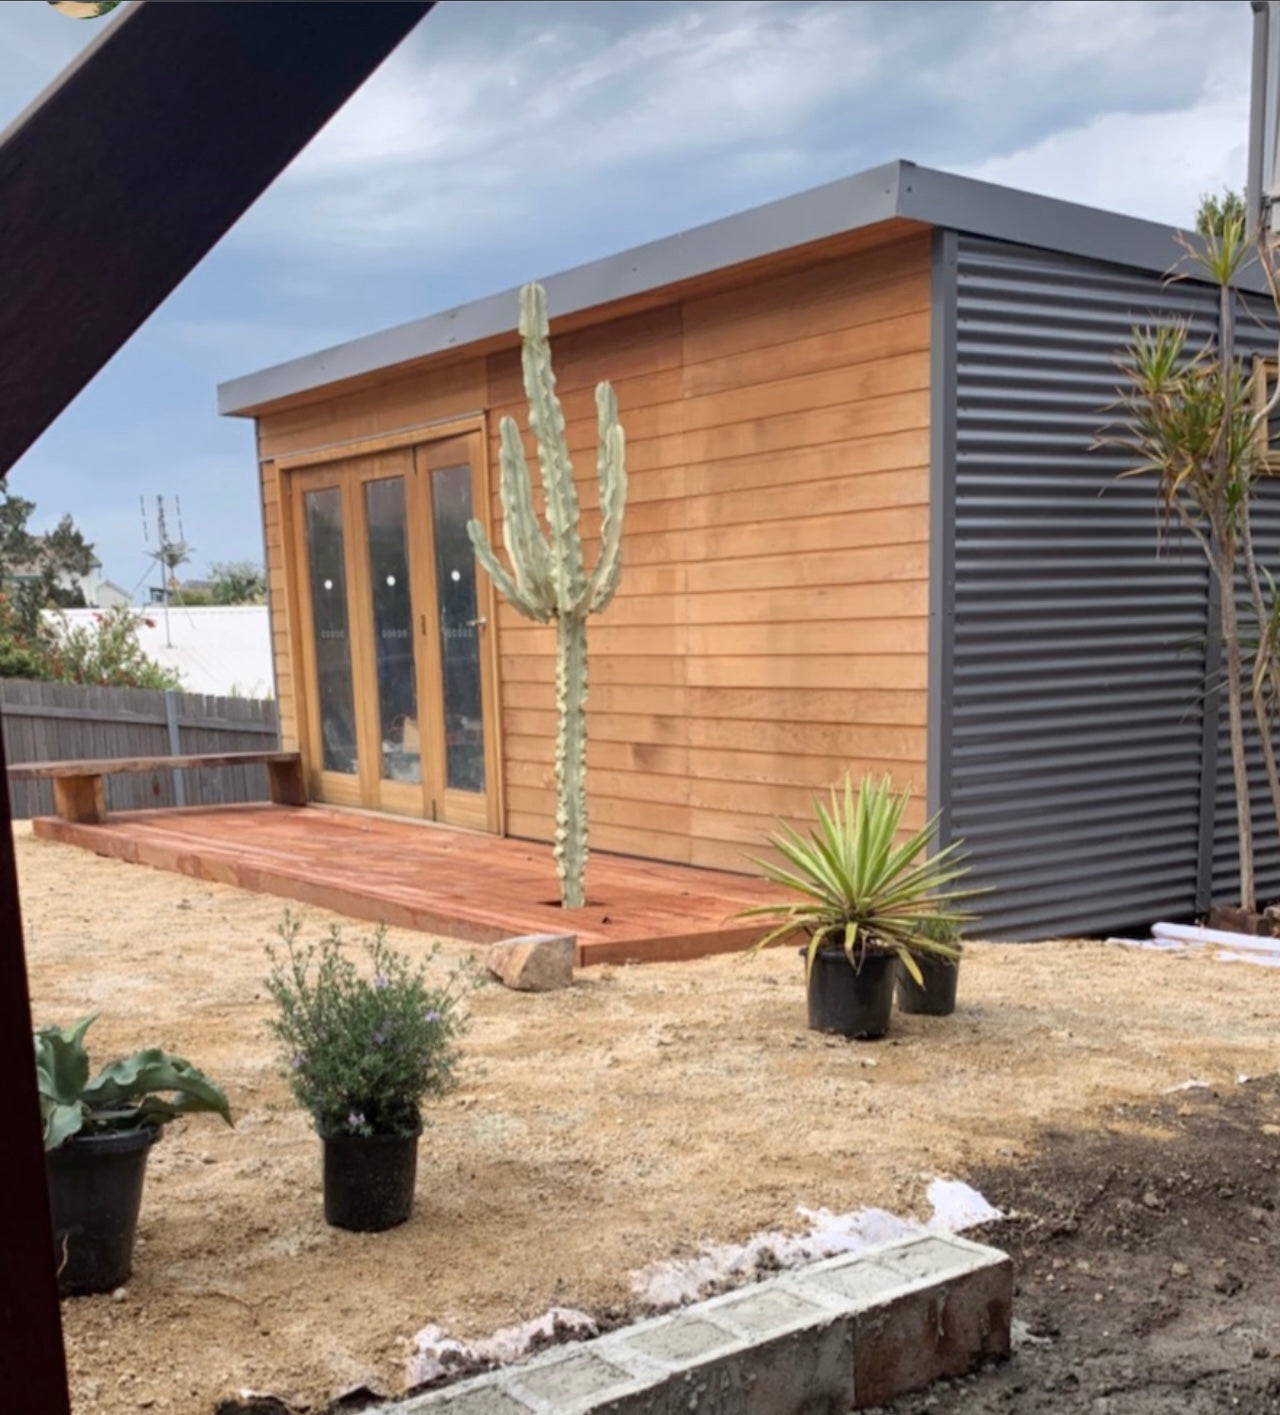 "The Haven" backyard pod, 6110mm x 3090mm, 18.8m2, with bifold doors, western red cedar on the front, and colorbond walls and roof. A spacious and stylish solution for creating a garden studio, she shed, backyard pod, or backyard office.